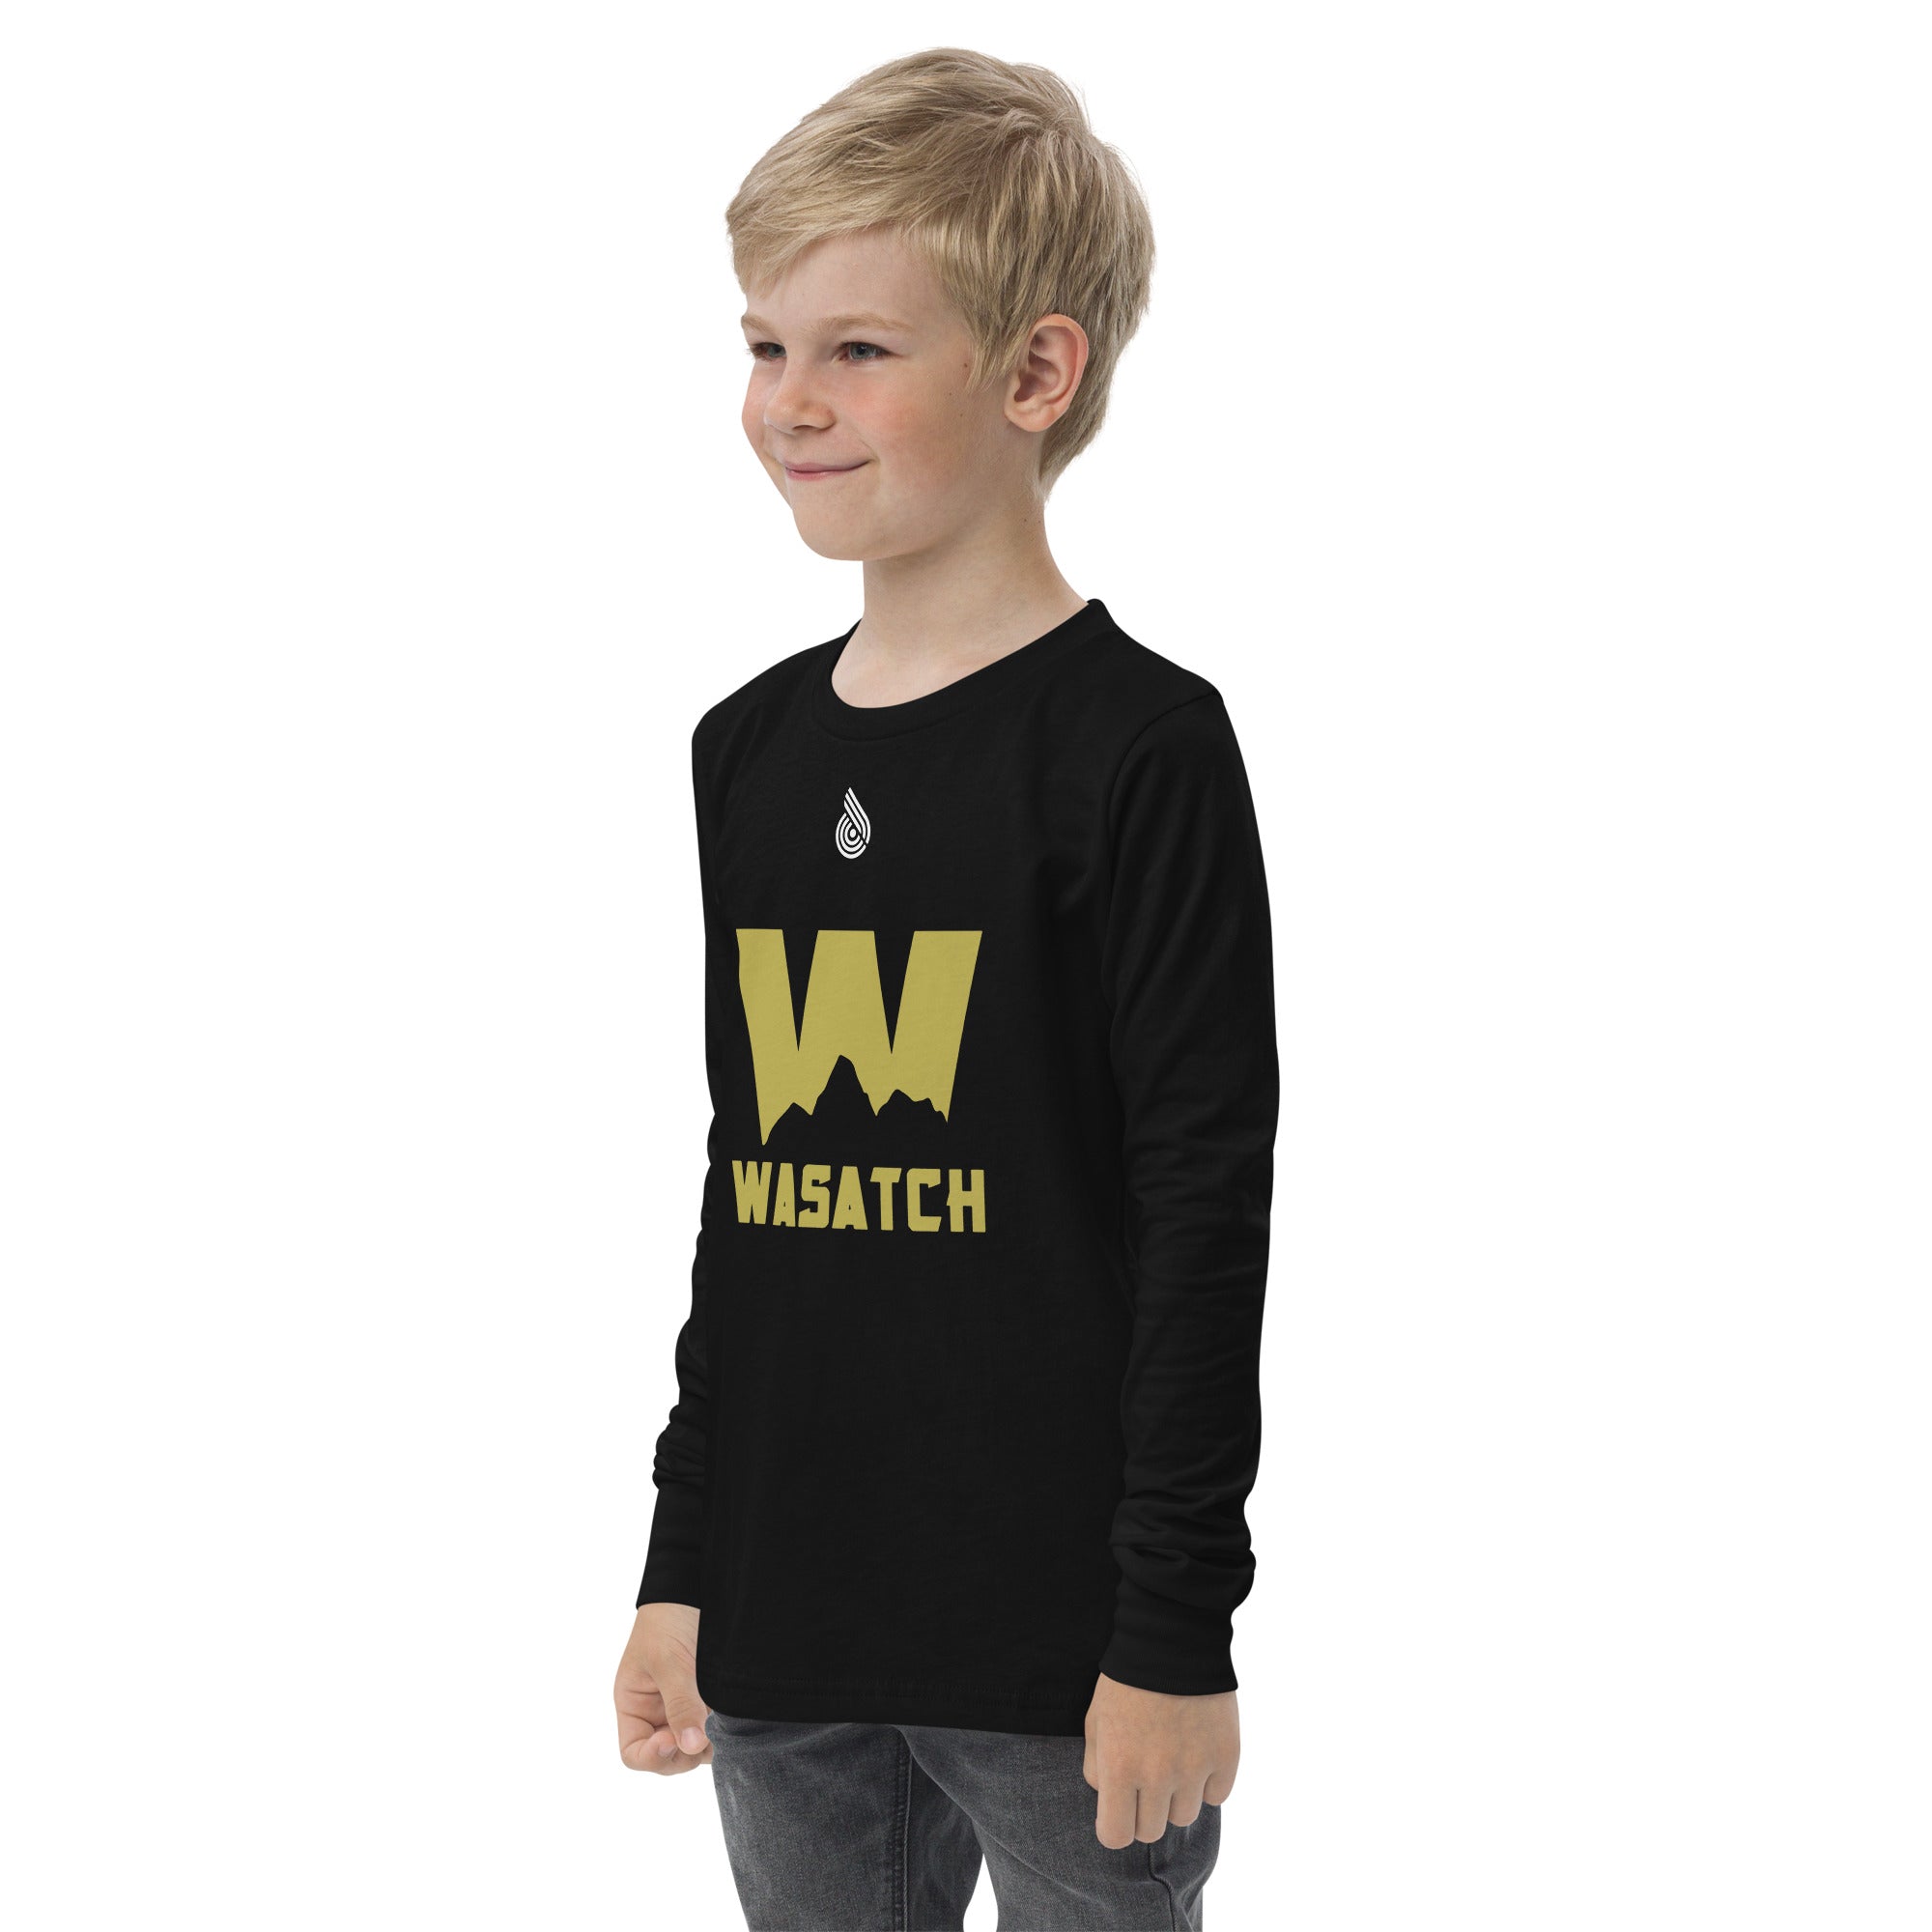 Wasatch Youth long sleeve tee